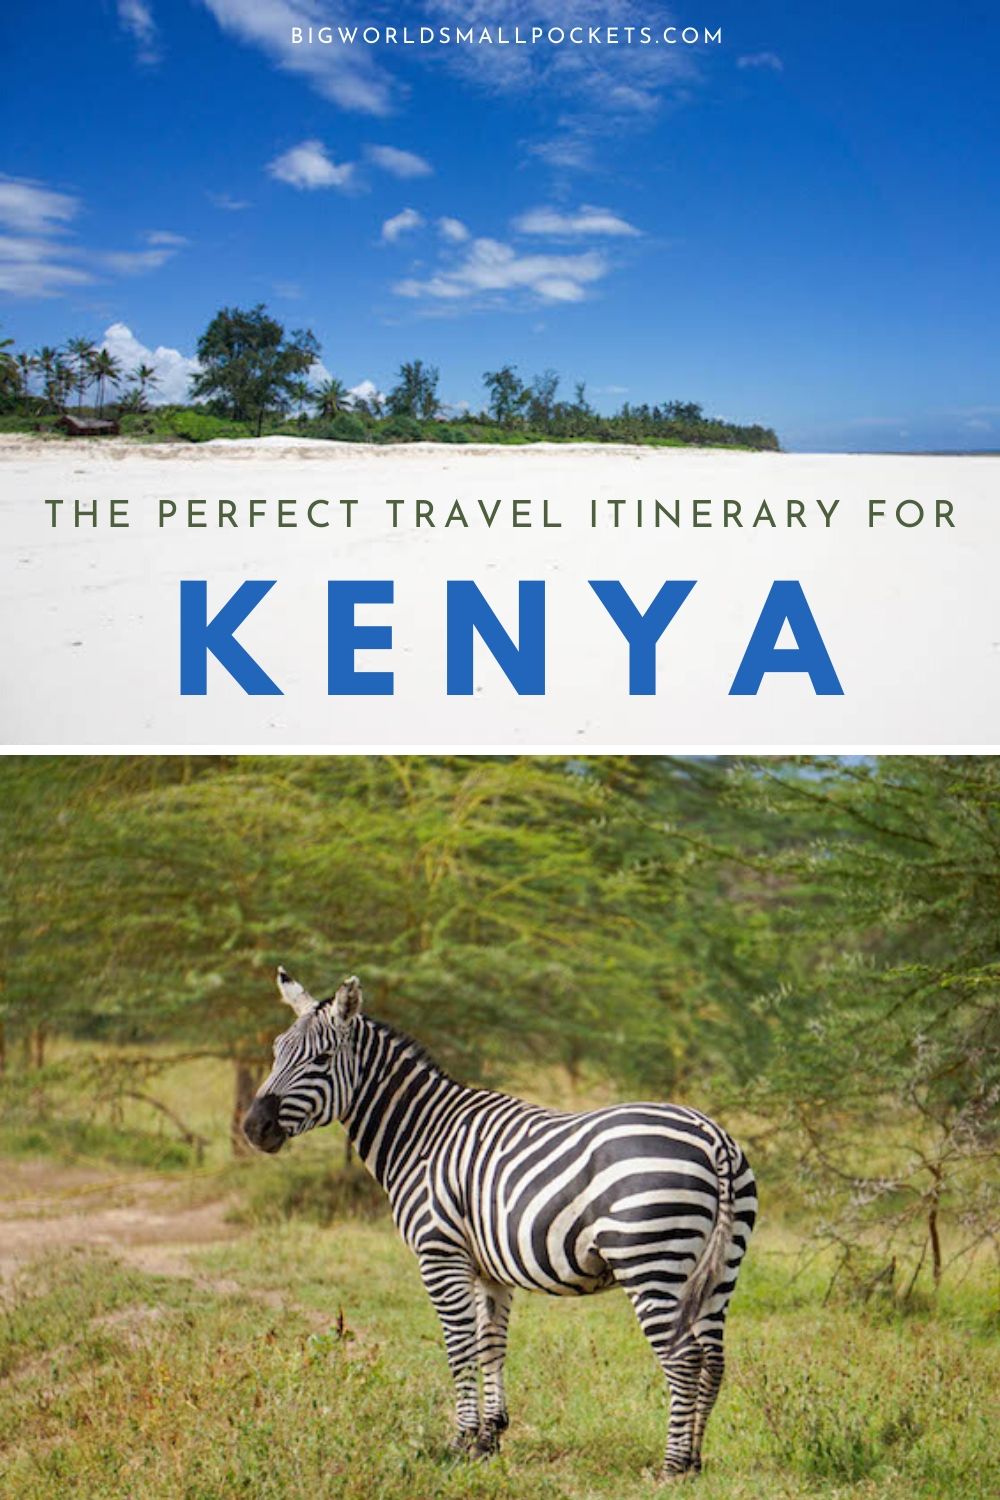 The Ultimate Travel Itinerary for Kenya